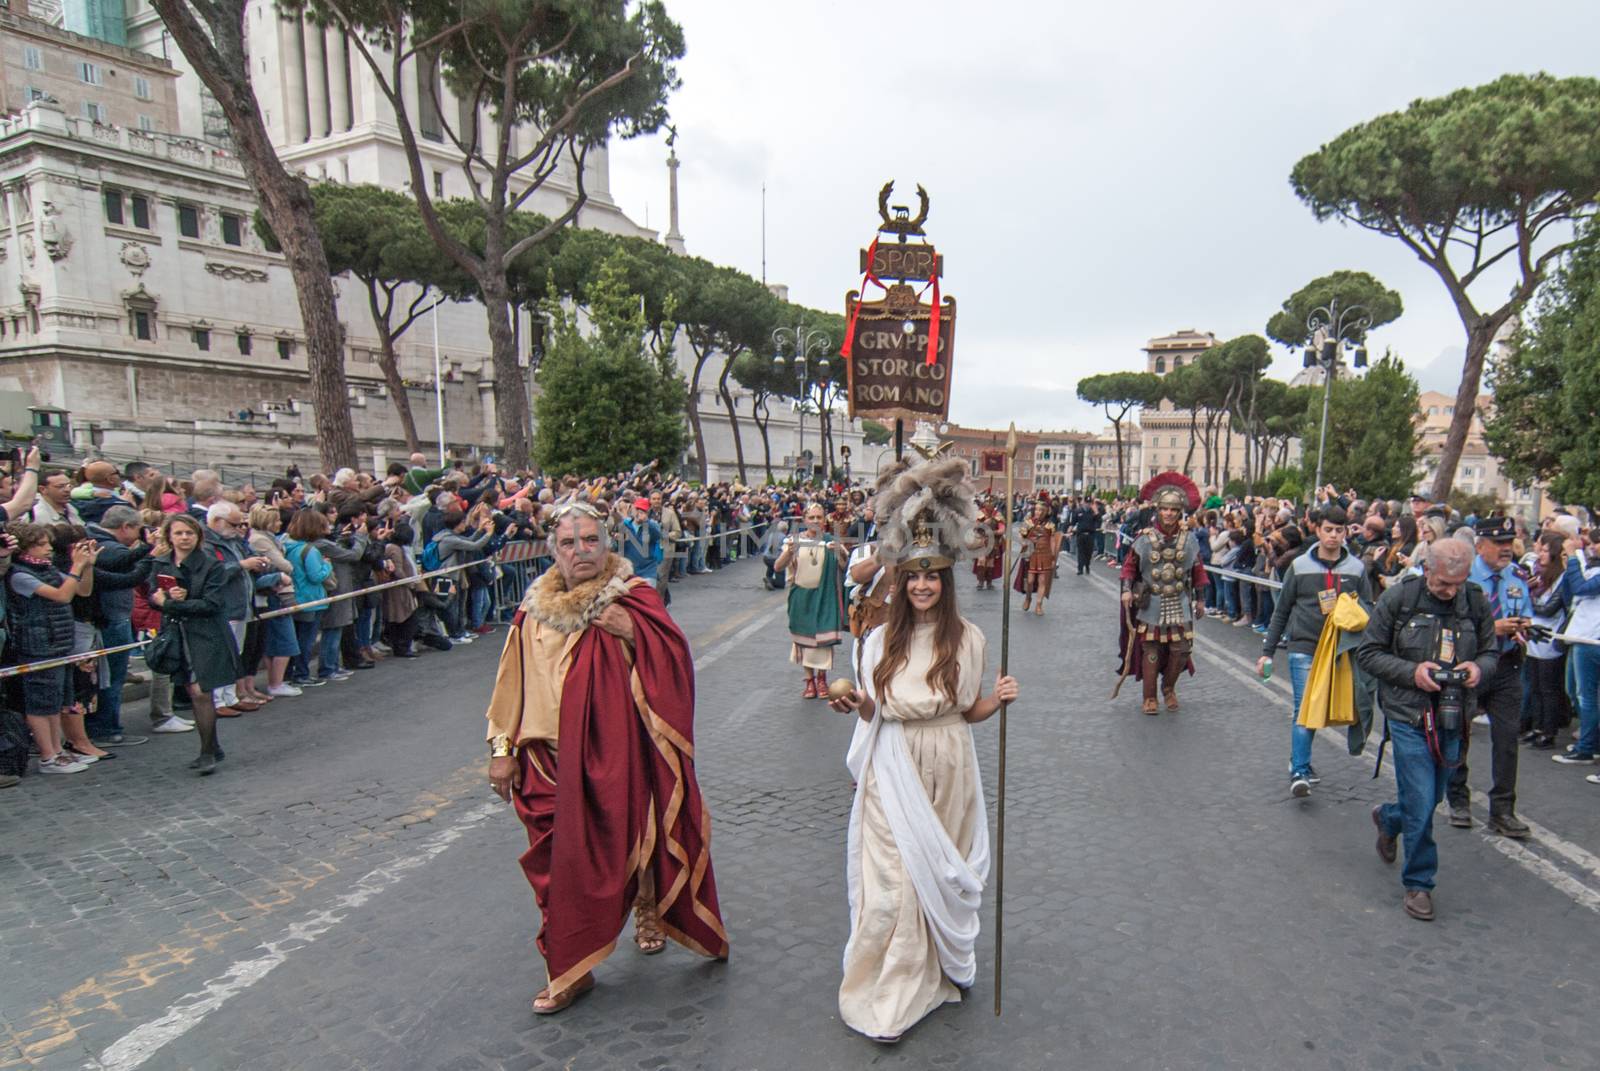 ITALY, Rome: People dresses as ancient romans parade near the Colosseum to commemorate the legendary foundation of the eternal city in 753 B.C, in Rome on April 24, 2016. 